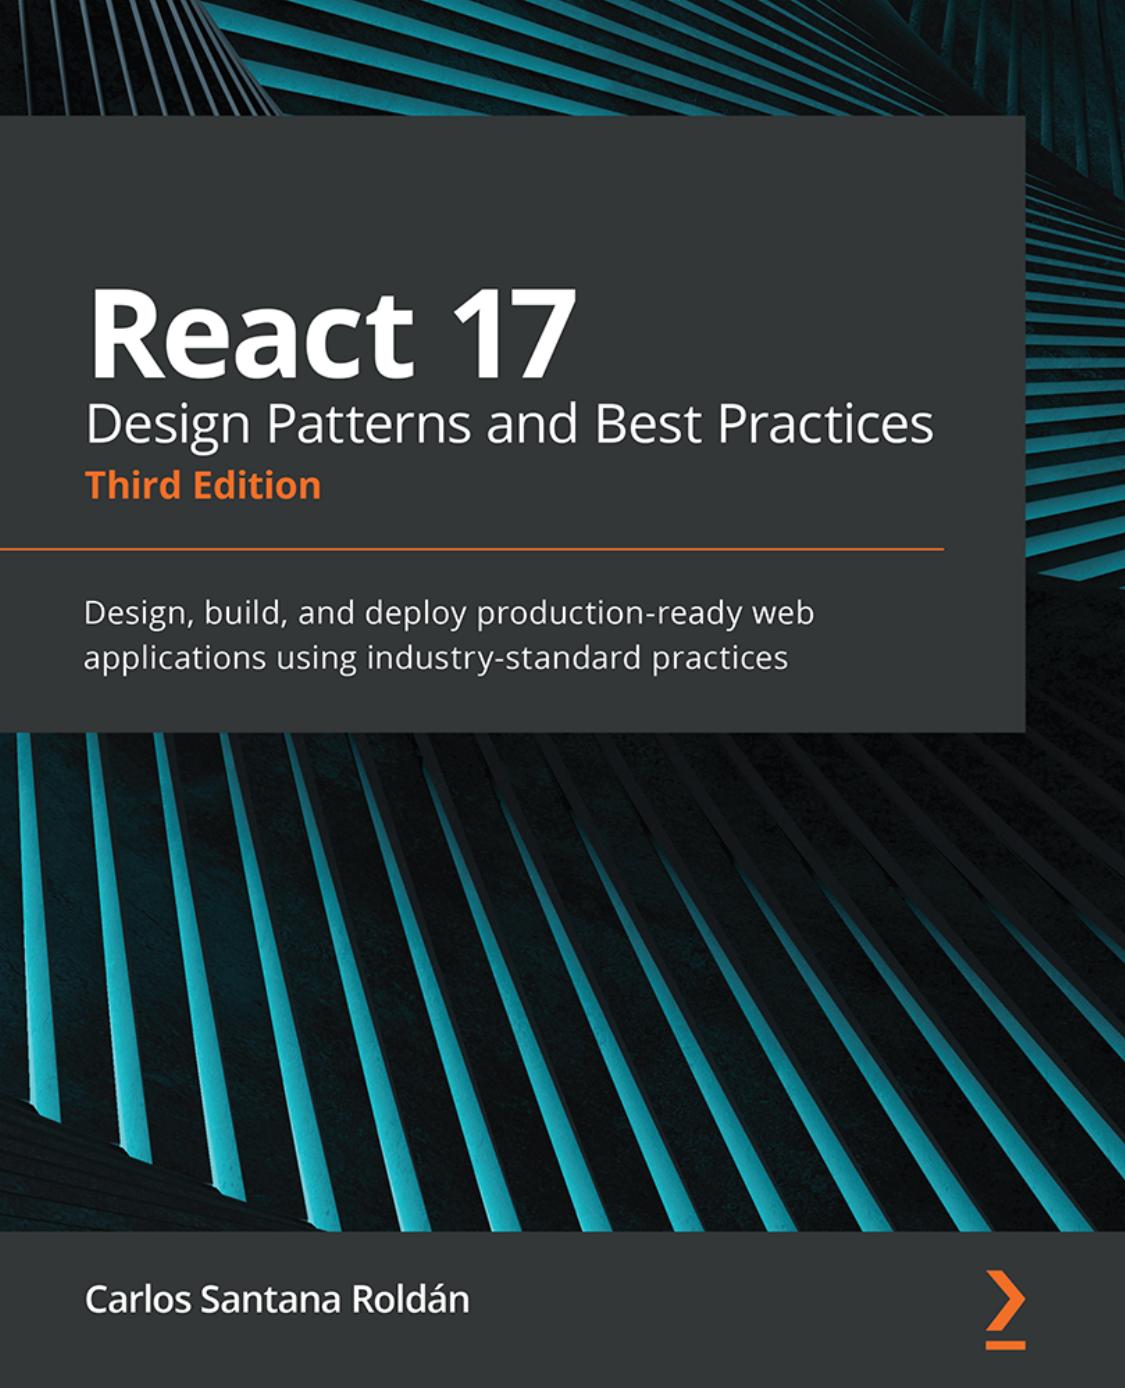 React 17 Design Patterns and Best Practices - Third Edition: Design, Build, and Deploy Production-Ready Web Applications using Industry-Standard Practices